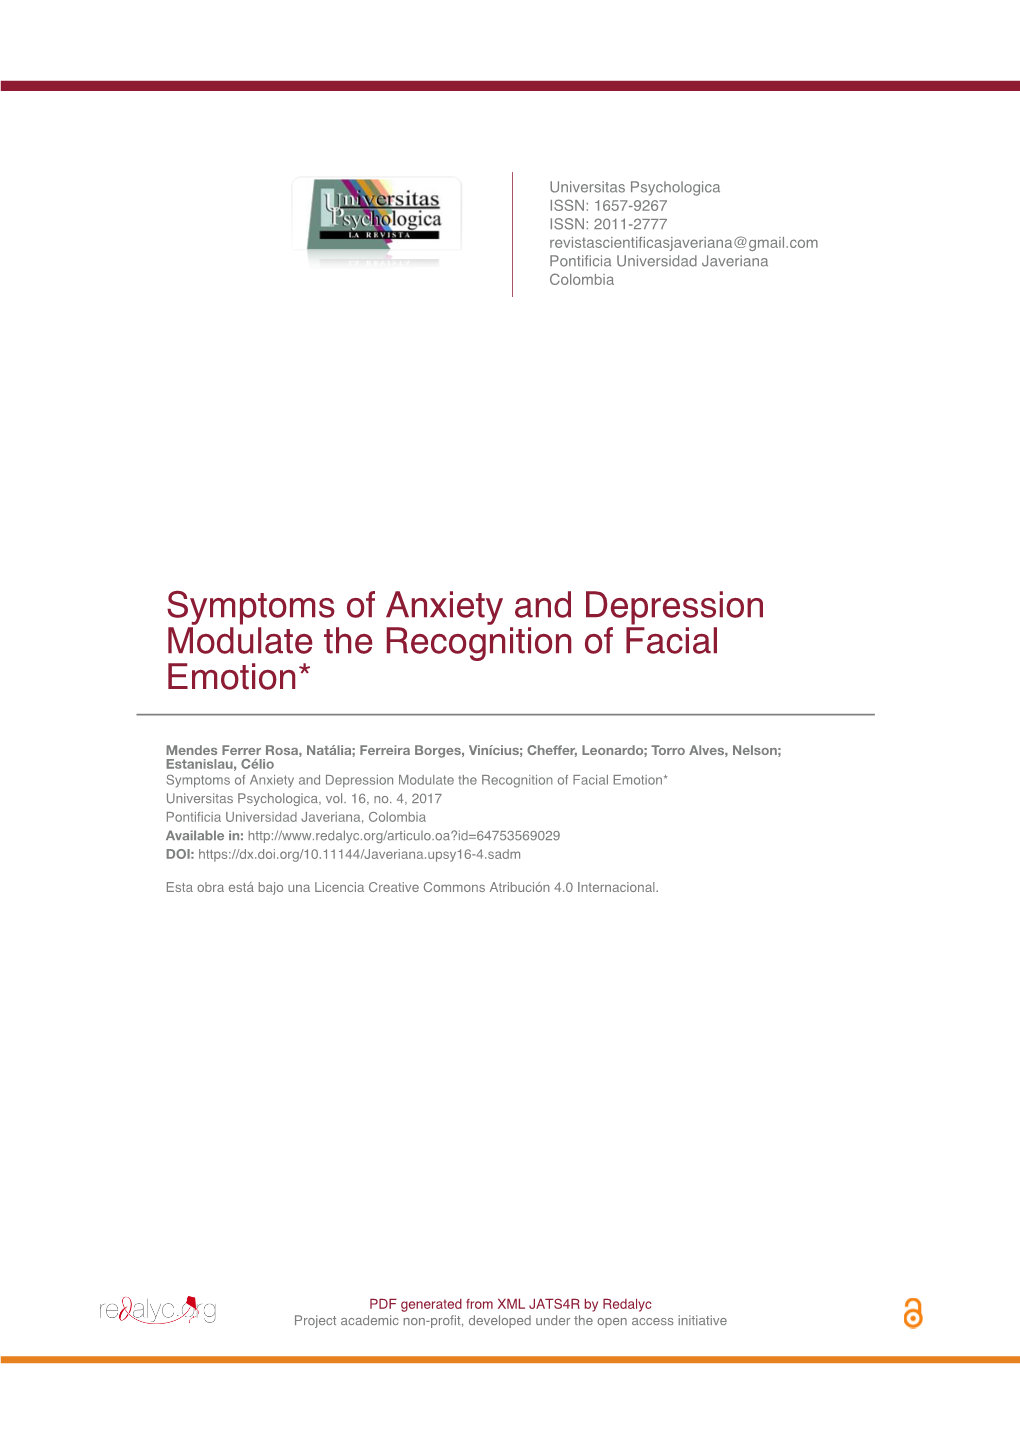 Symptoms of Anxiety and Depression Modulate the Recognition of Facial Emotion*